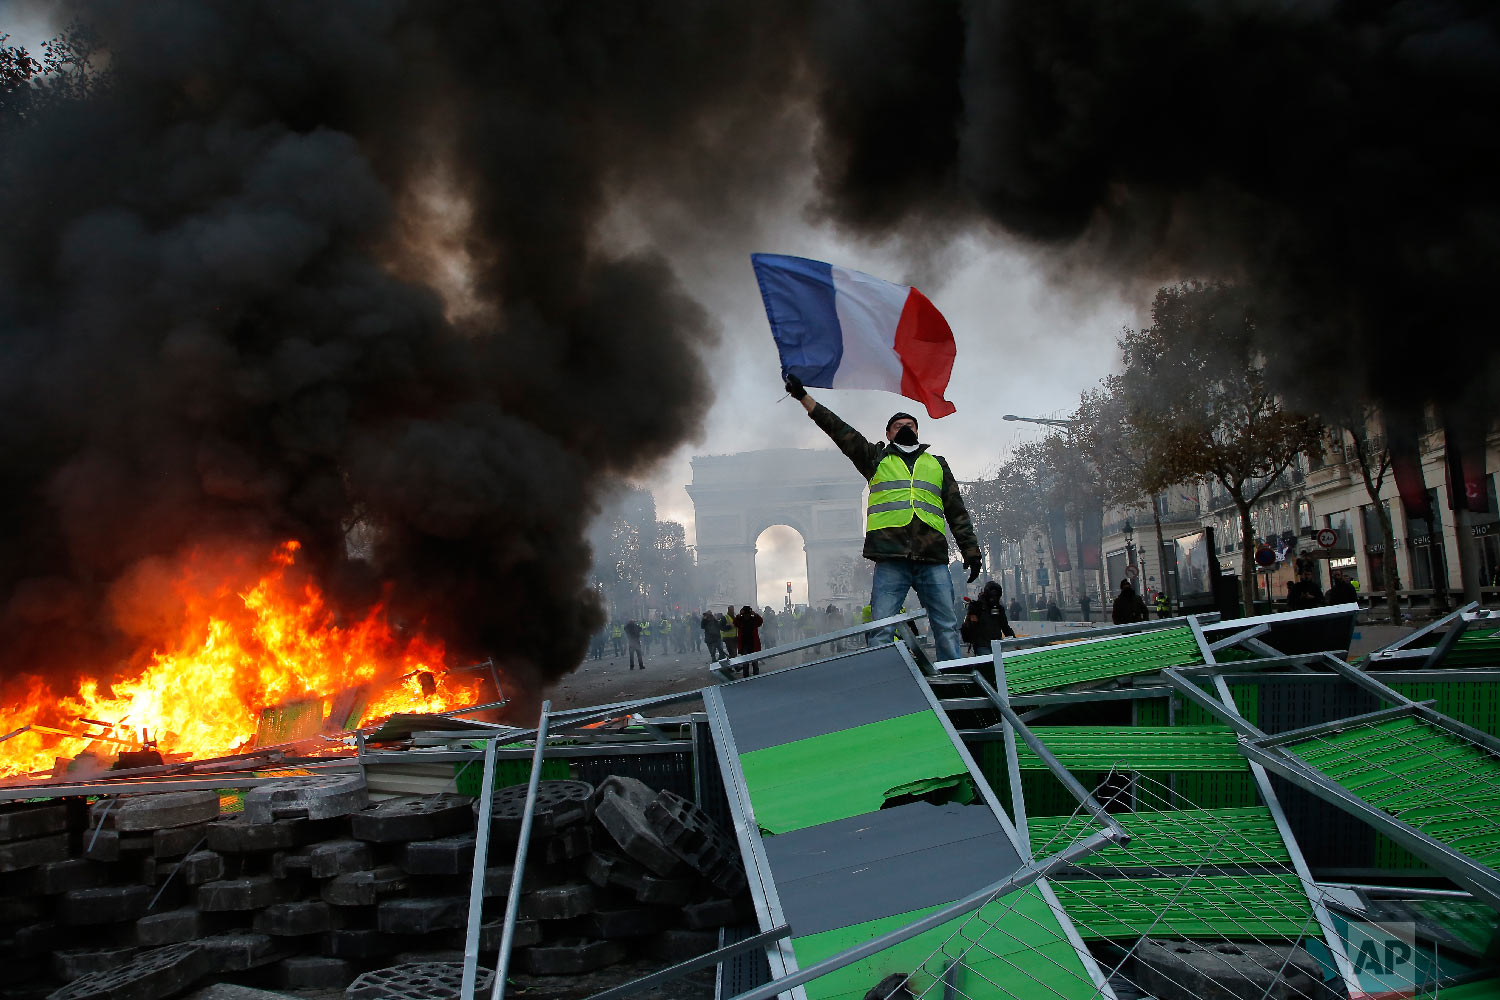  A demonstrator waves the French flag onto a burning barricade on the Champs-Elysees avenue during a demonstration against the rising of the fuel taxes in Paris on Nov. 24, 2018. (AP Photo/Michel Euler) 